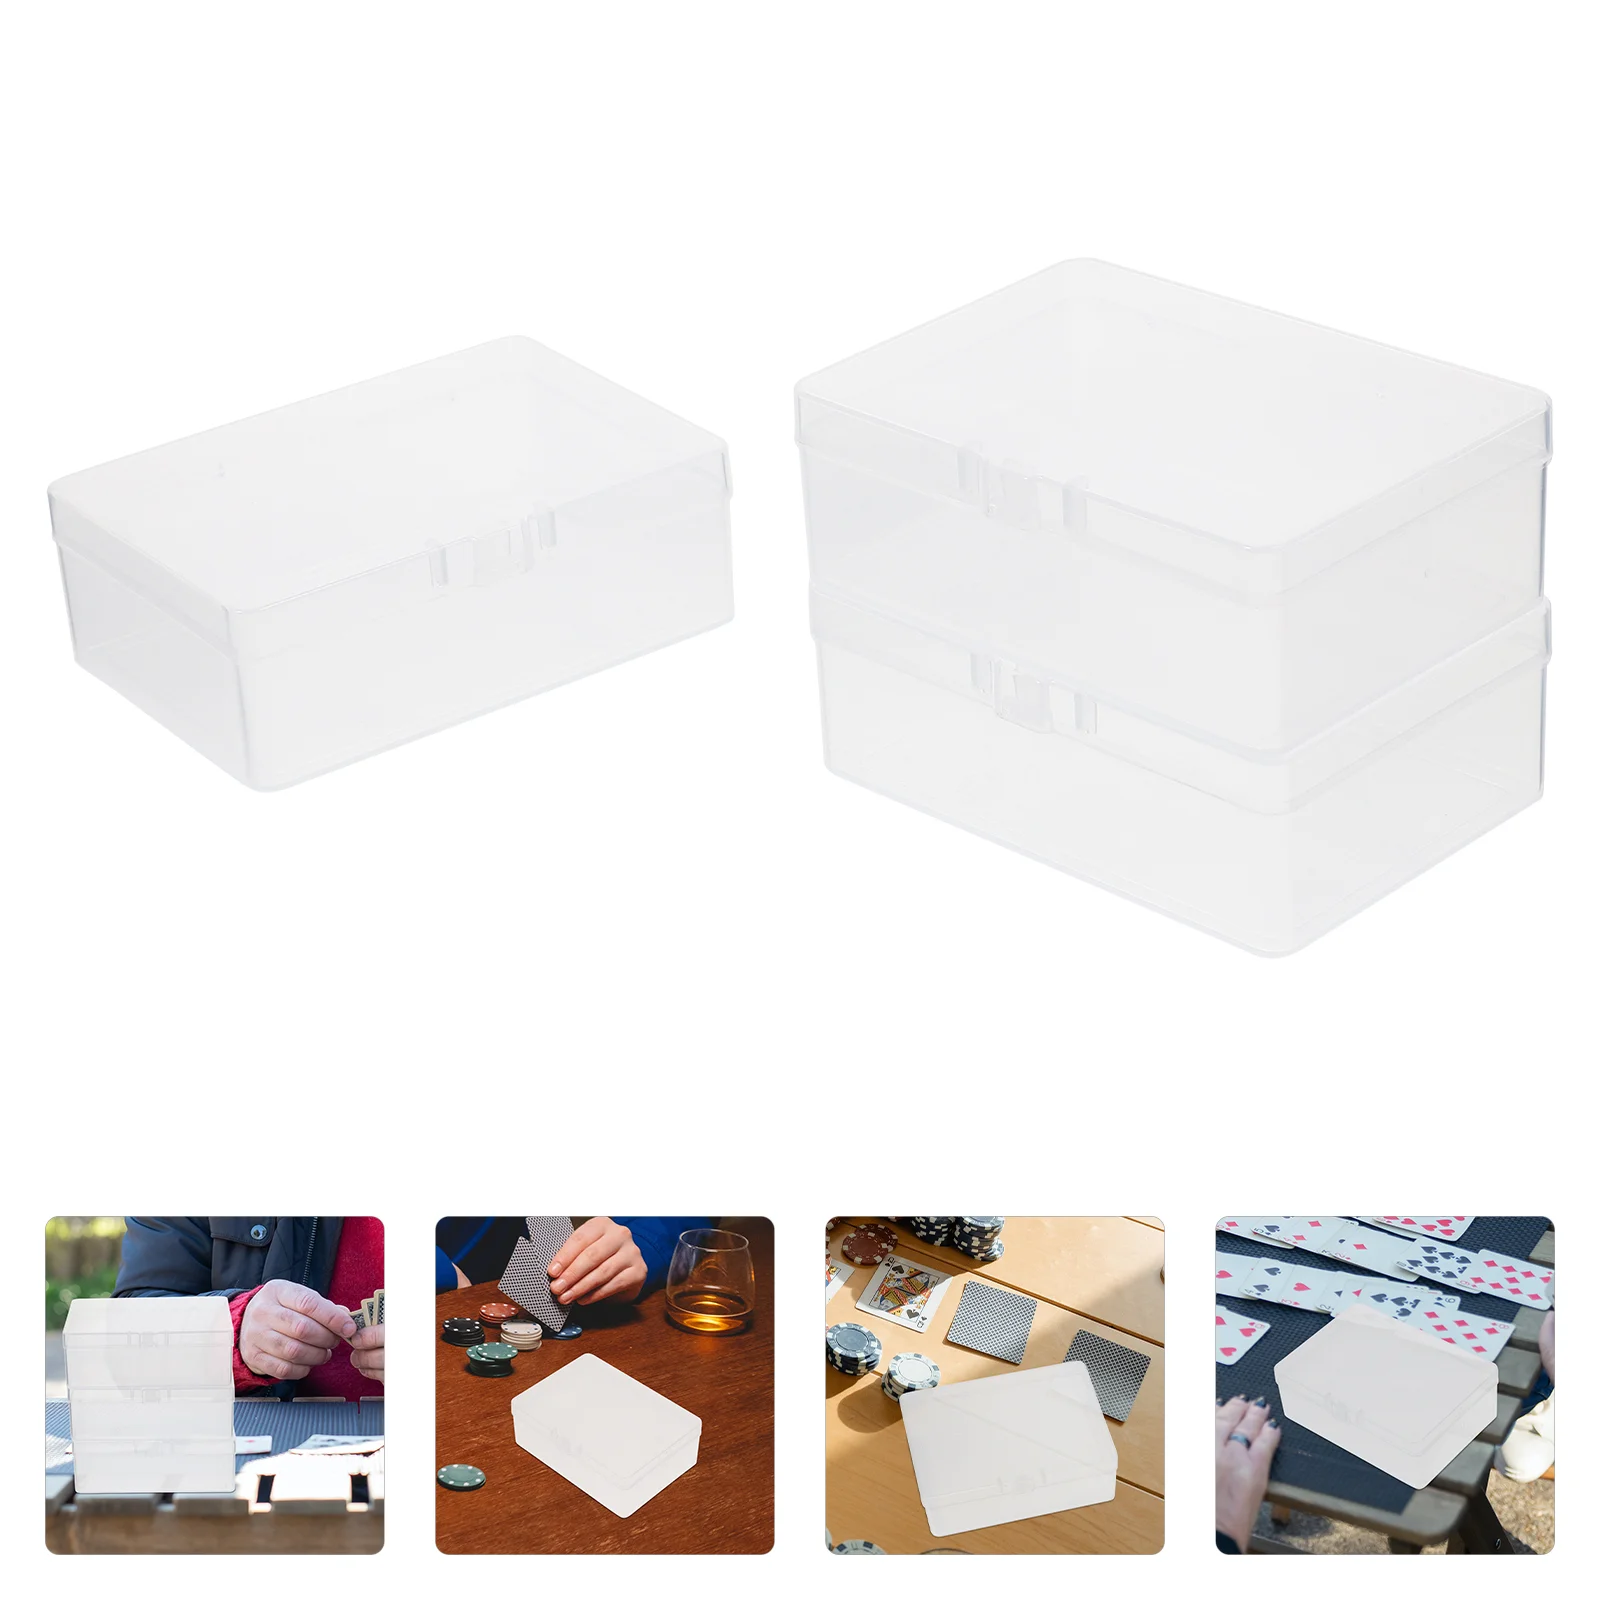 

3 Pcs Card Storage Box Plastic Beads Cases Cards Organizers Playing Clear Poker Pp Container Lid